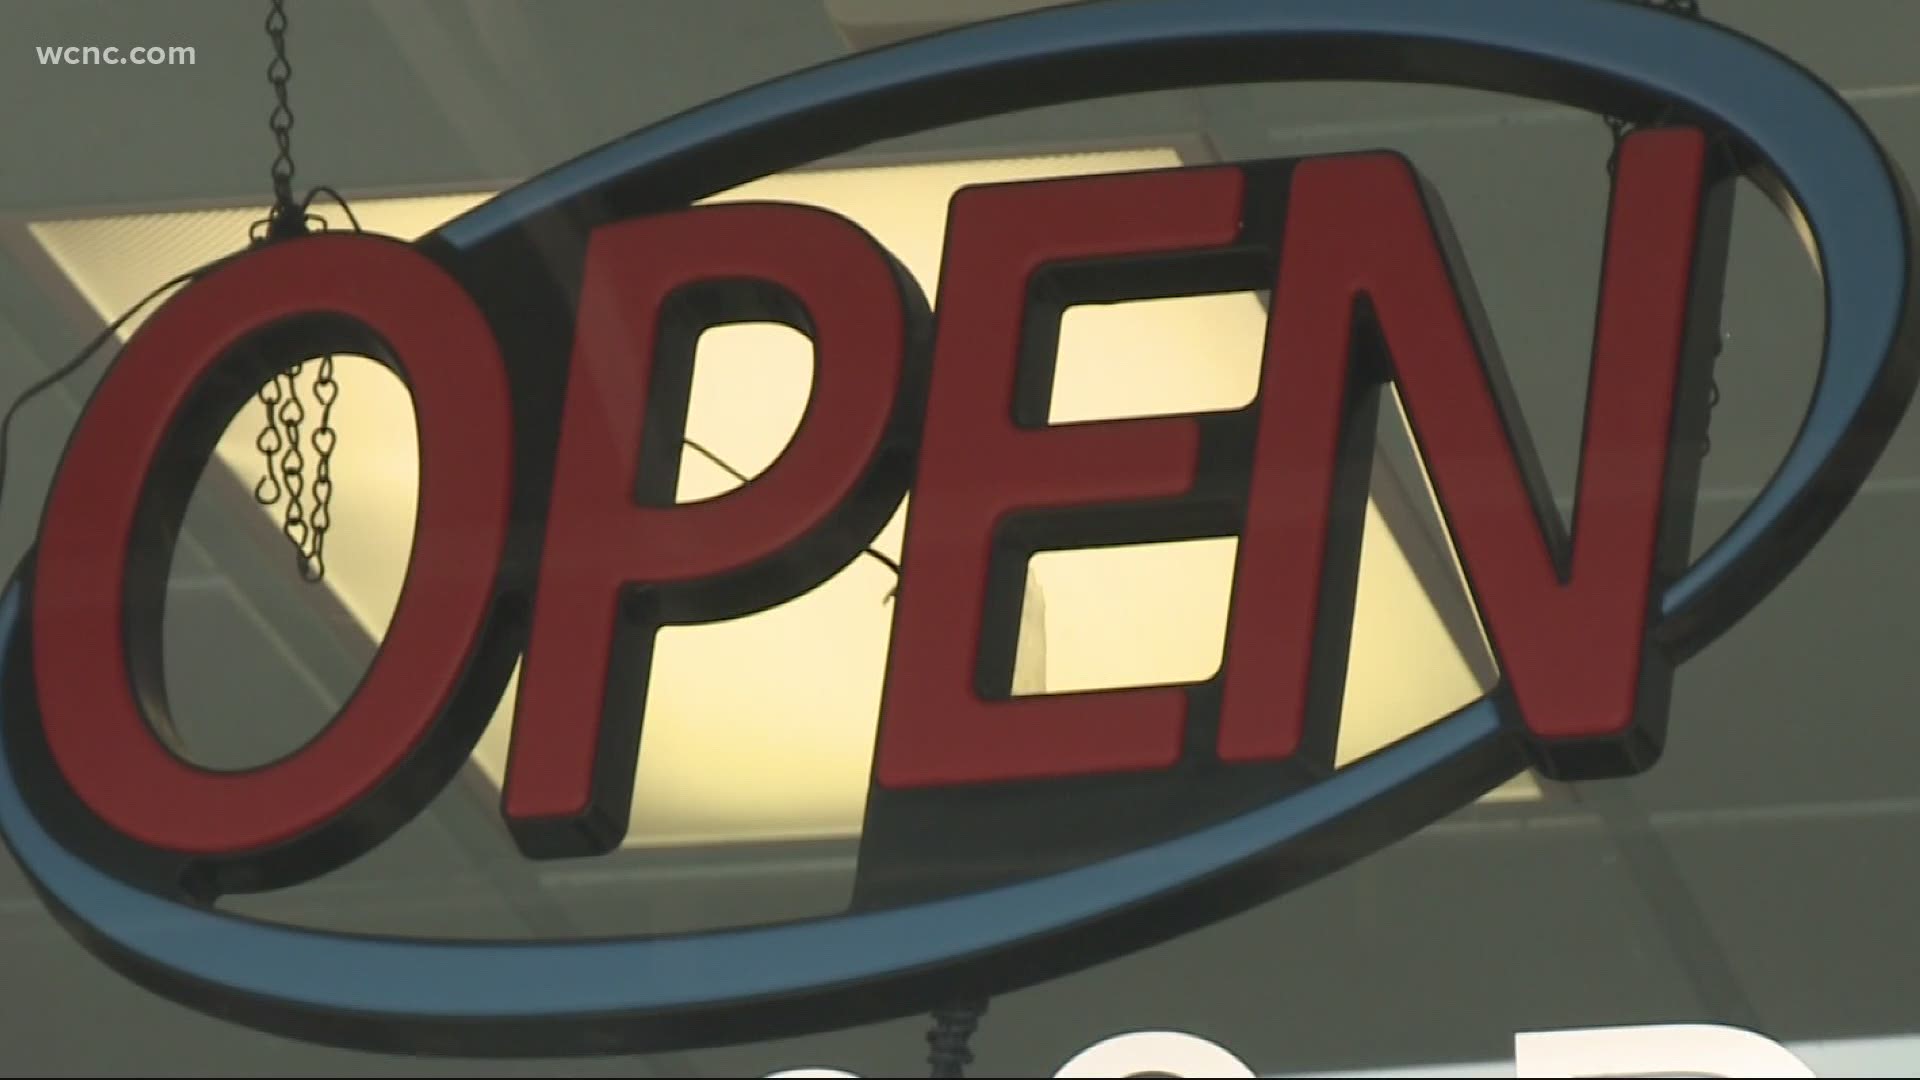 In phase one of NC three-step plan to reopen, some stores open while others chose to wait.